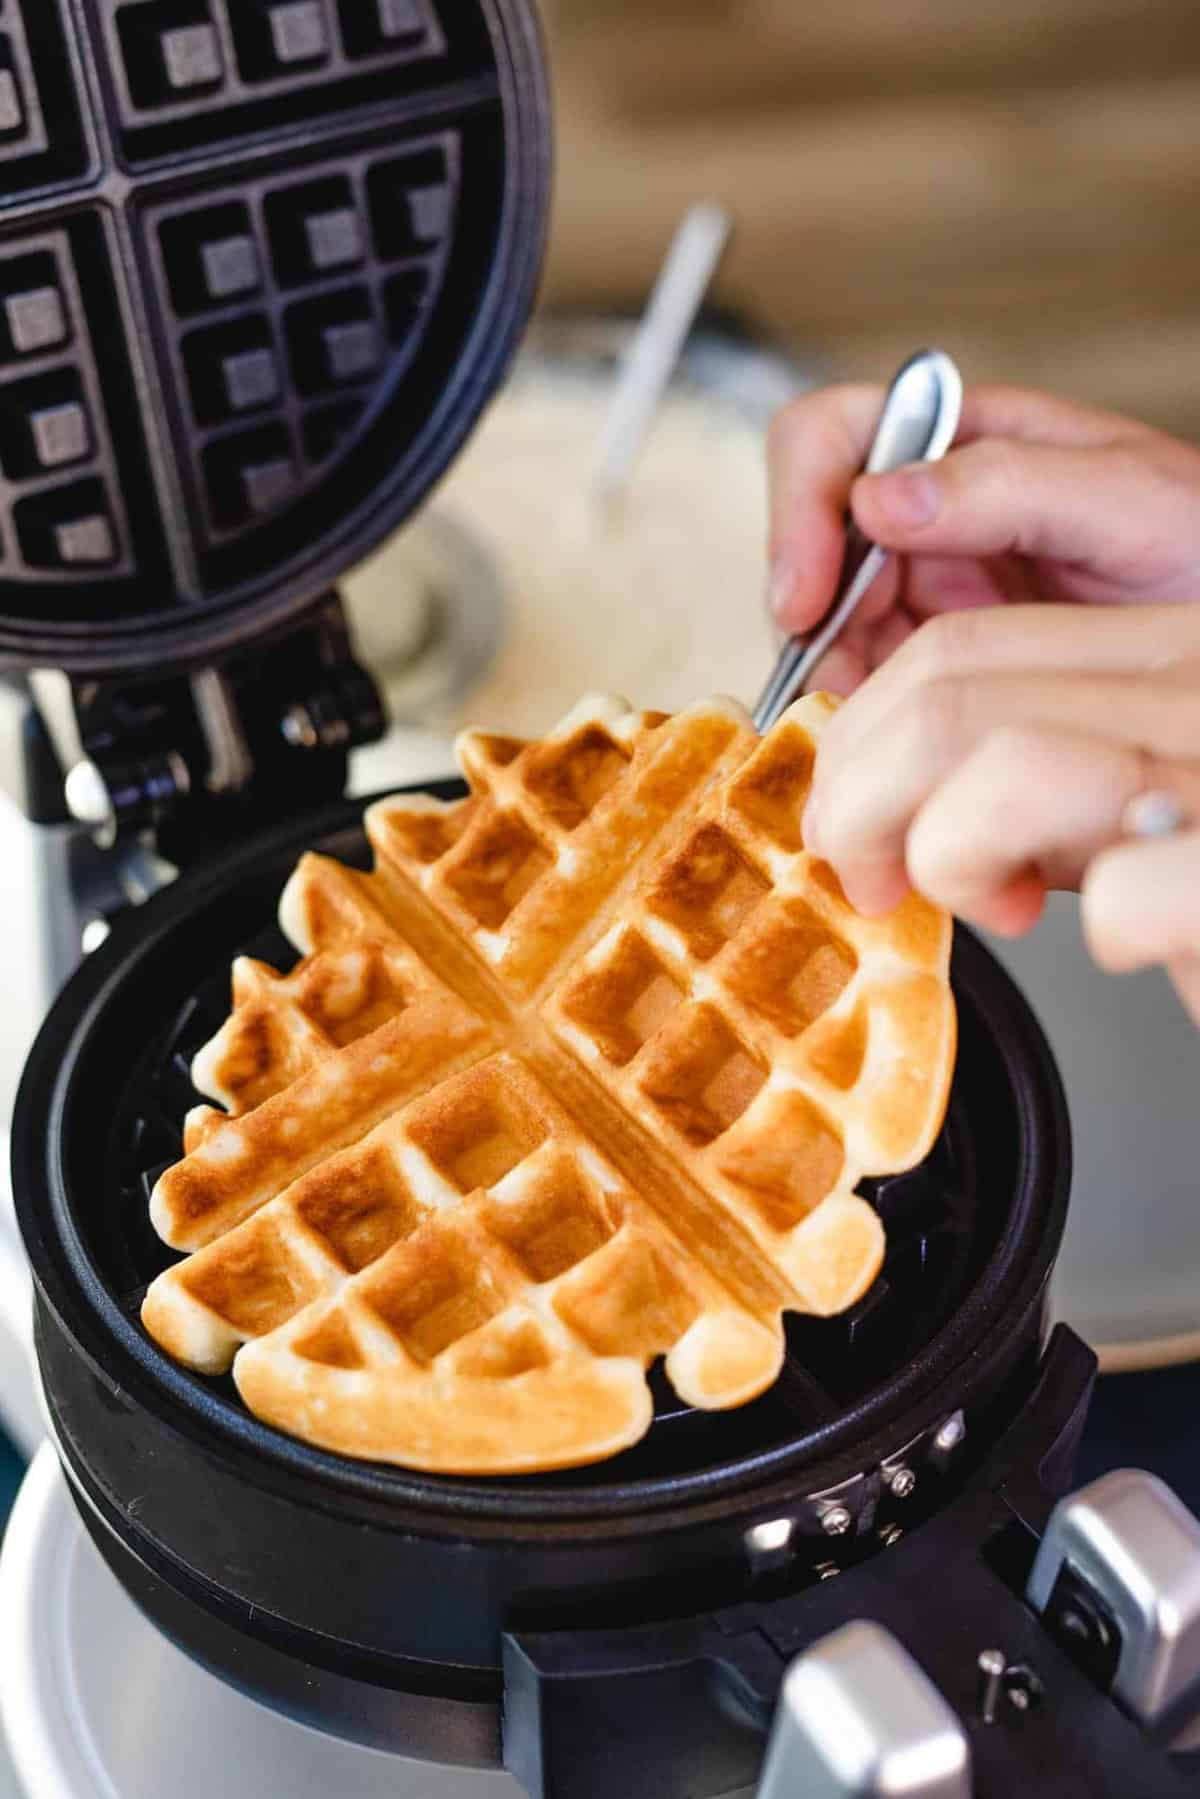 Ashley pulls a golden brown, crispy waffle off of a waffle iron.